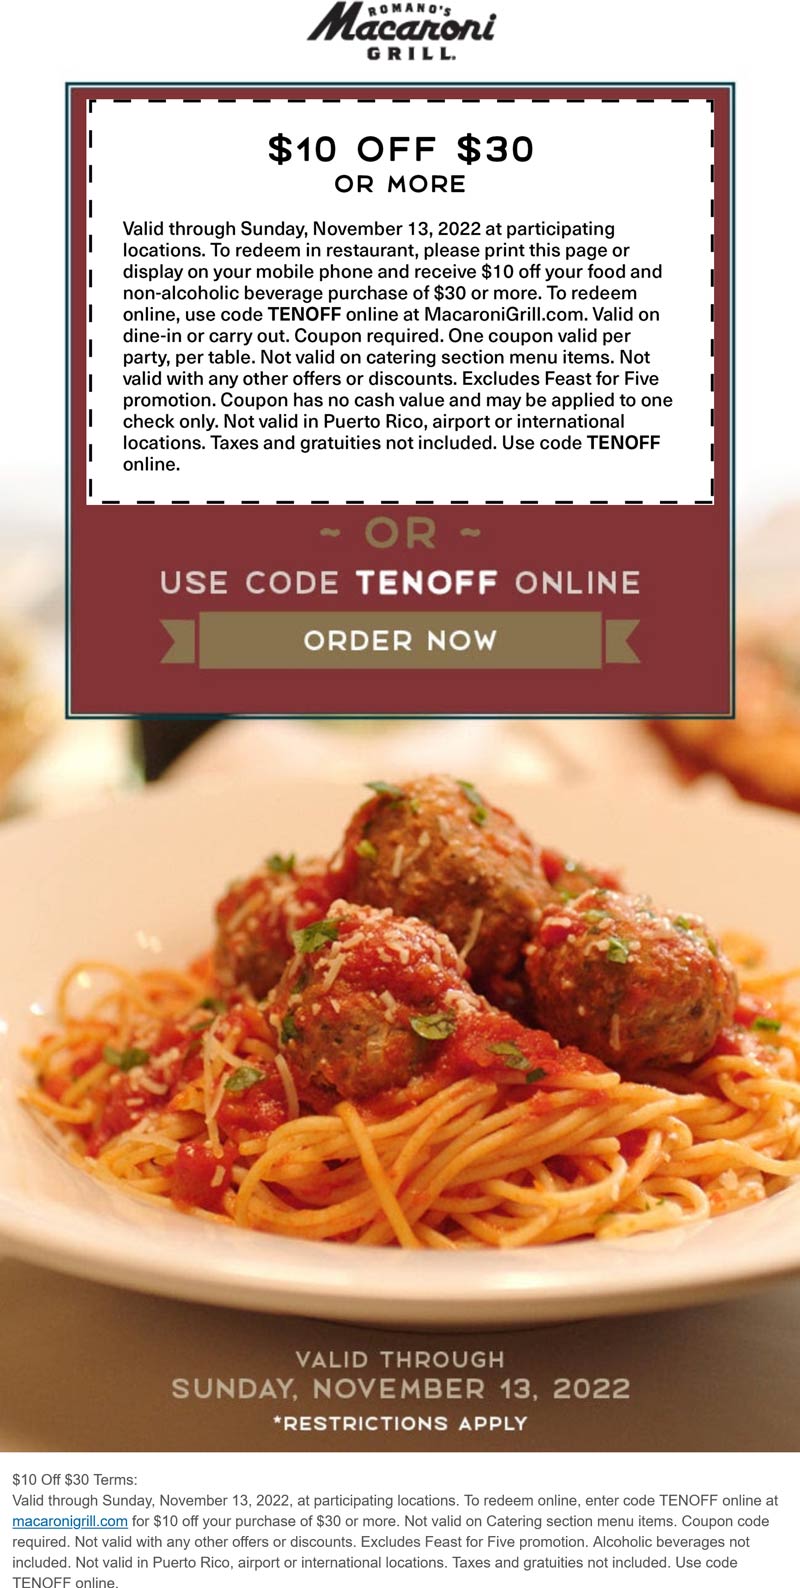 Macaroni Grill restaurants Coupon  $10 off $30 at Macaroni Grill restaurants, or online via promo code TENOFF #macaronigrill 